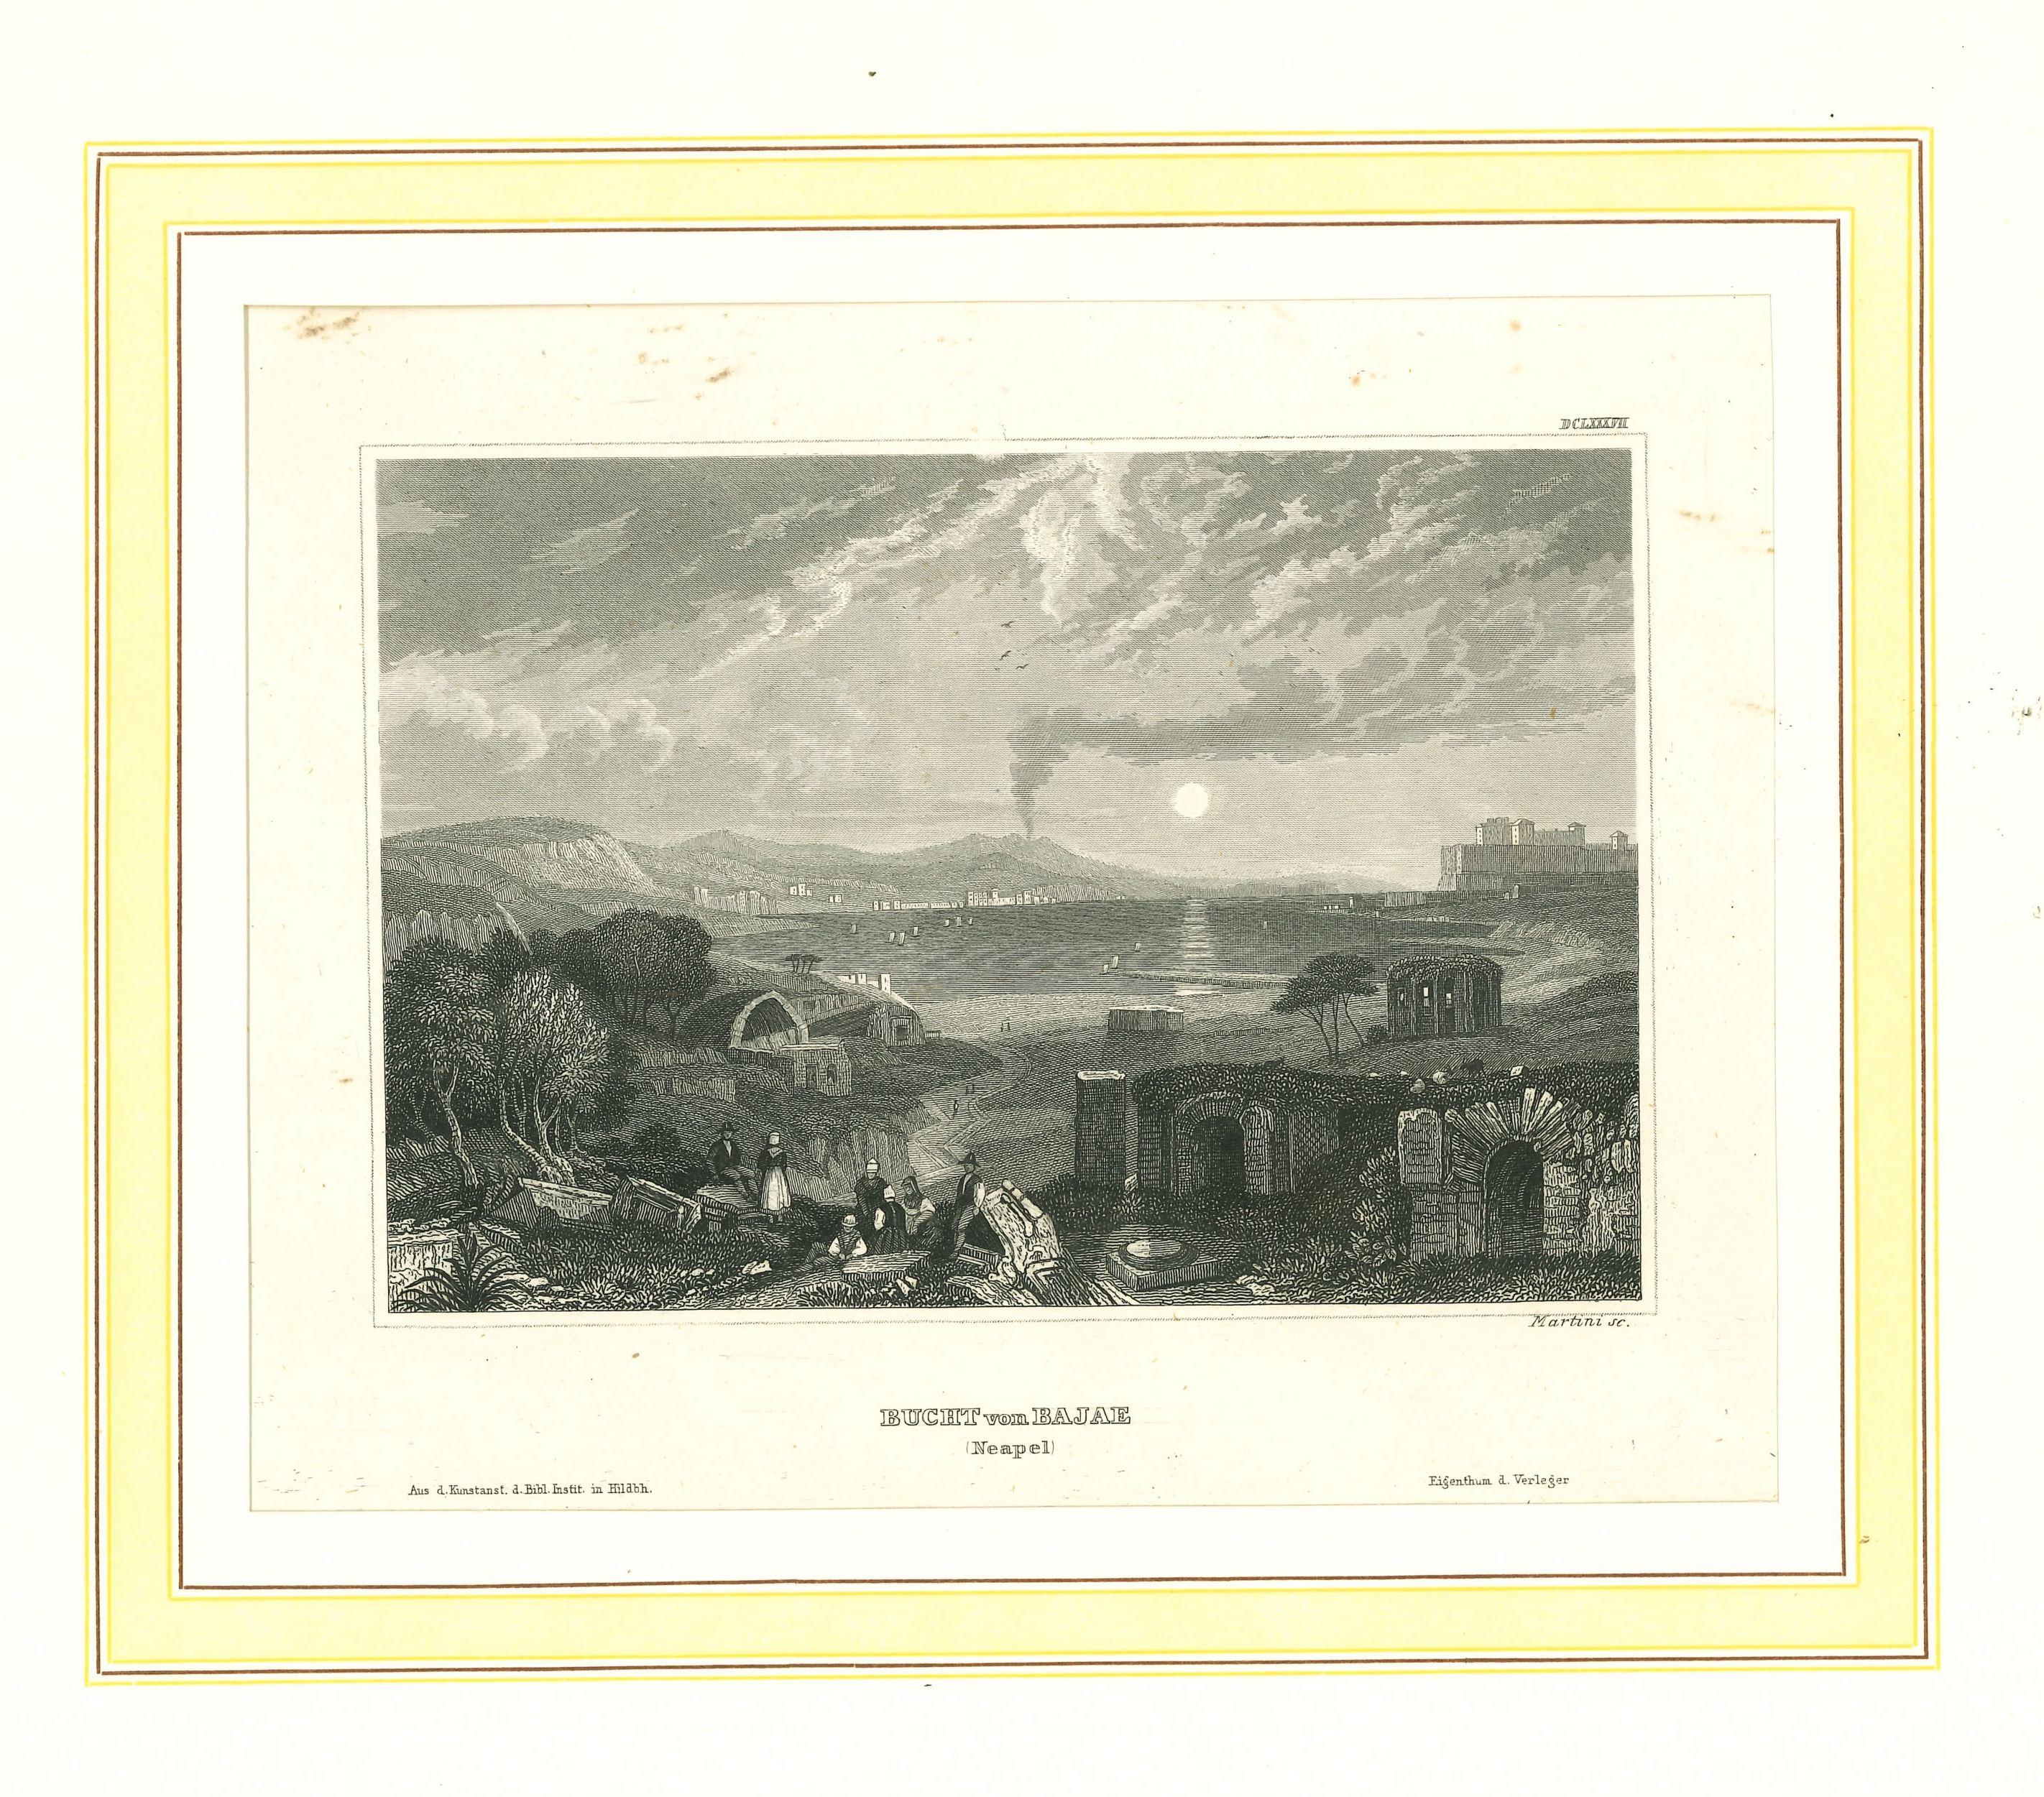 Unknown Figurative Print - The Bay - Original Lithograph on Paper - Mid-19th Century